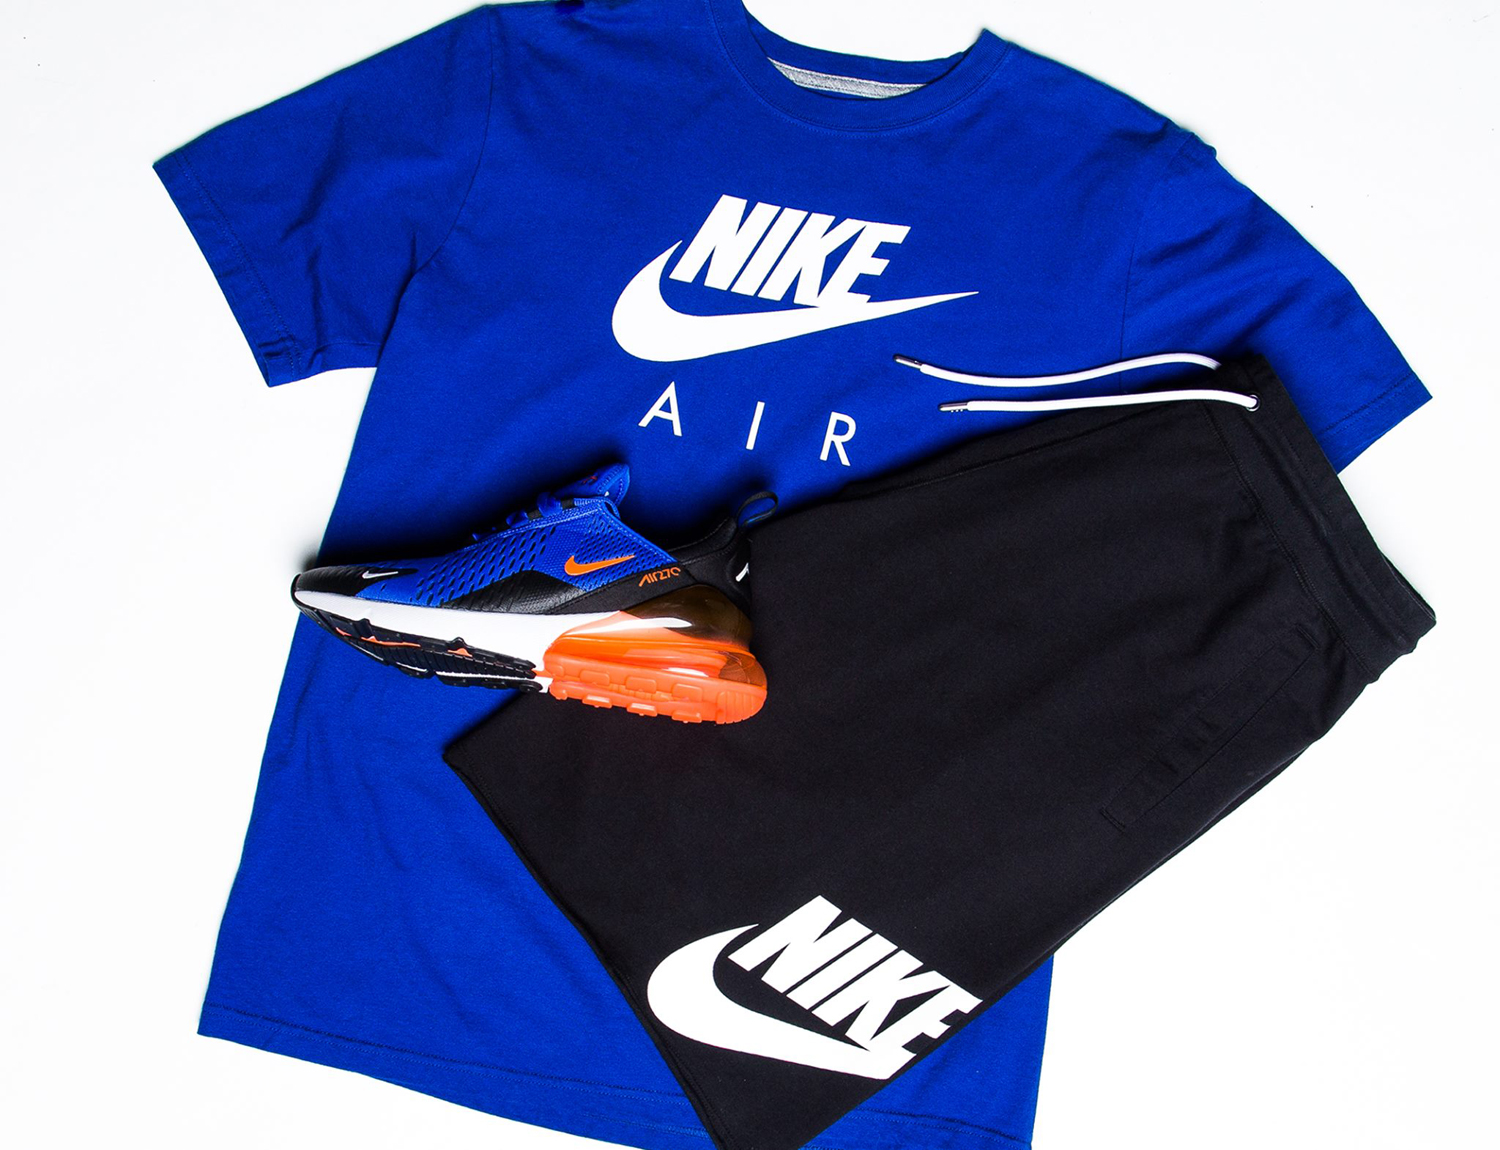 shirts to go with air max 270